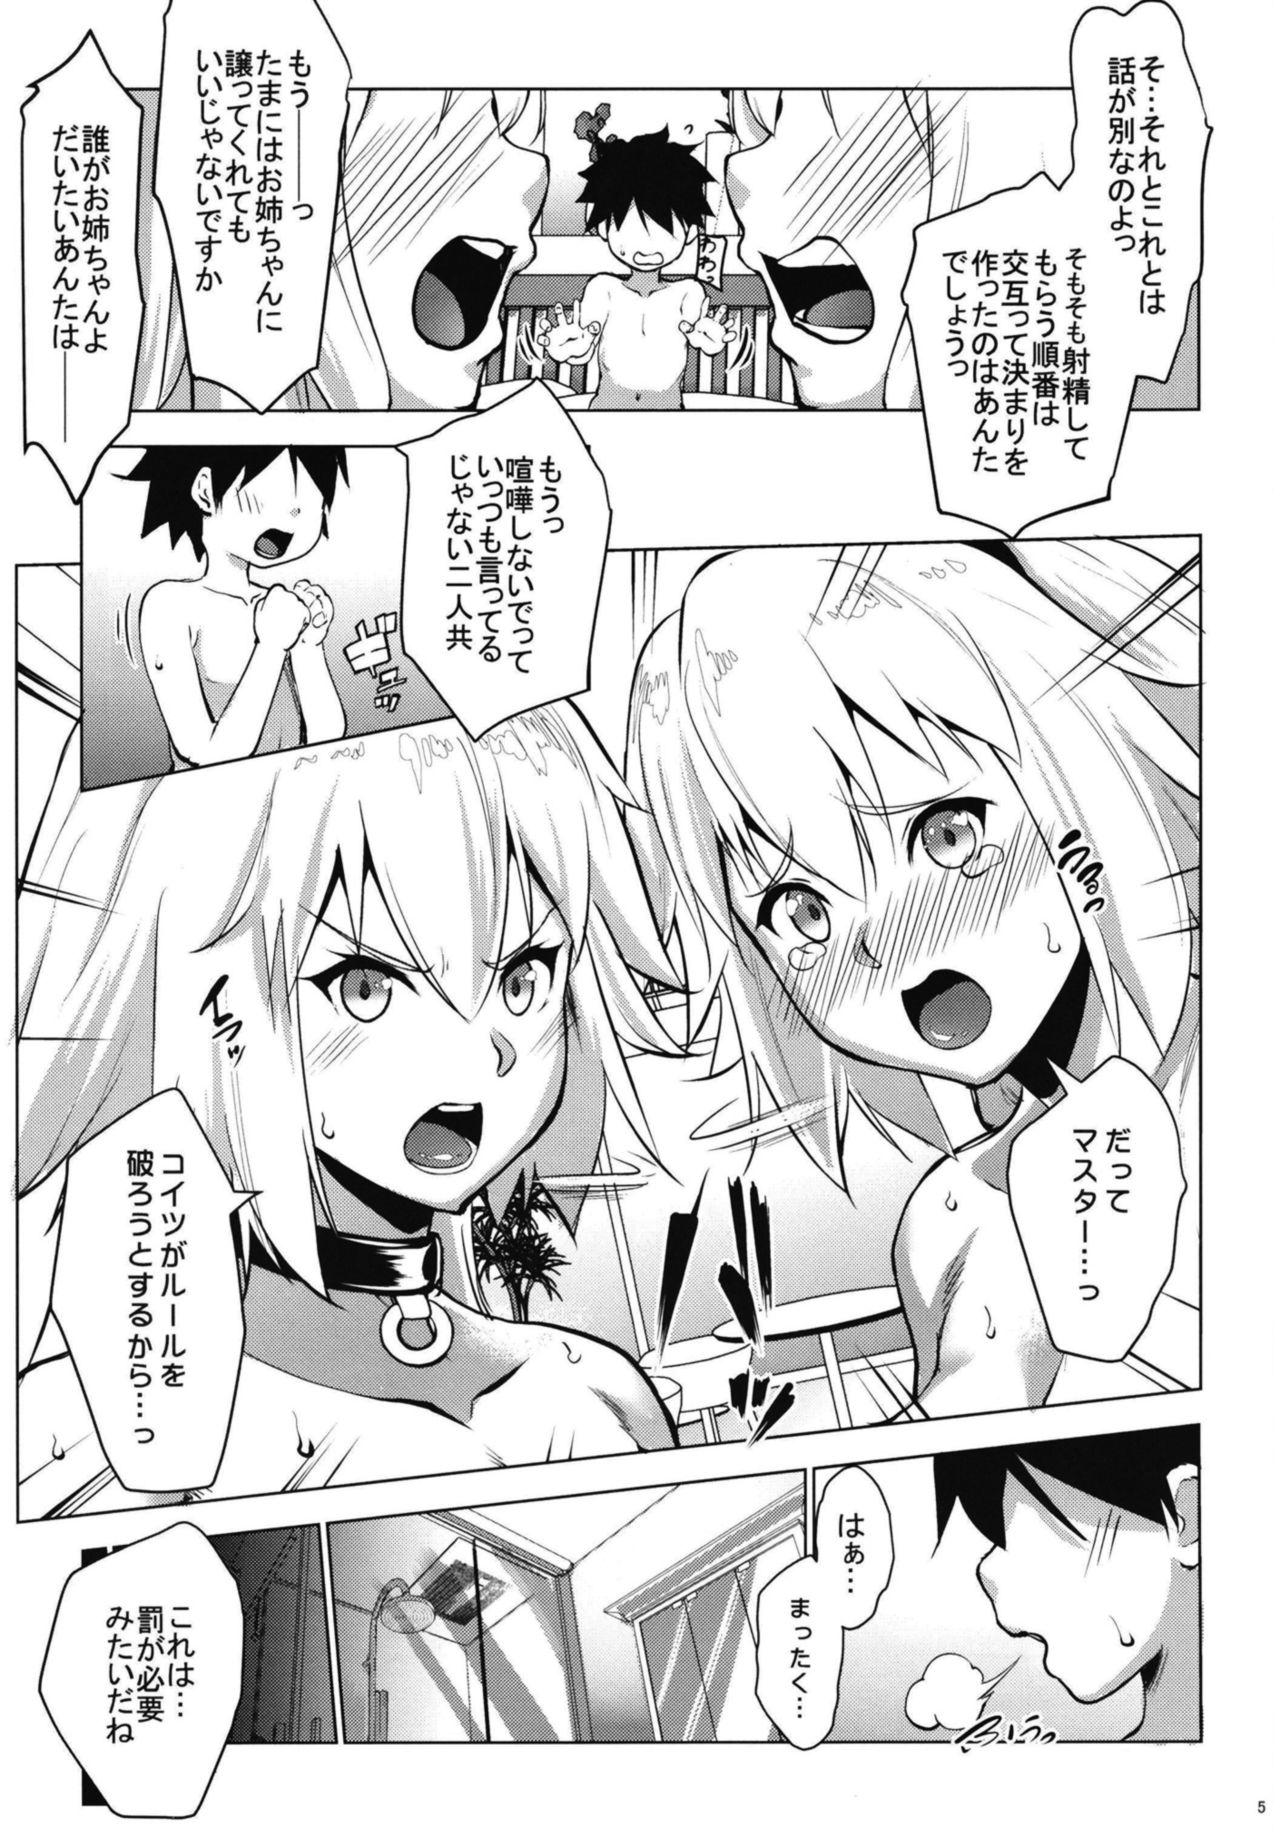 Bondage Obedient Servant Jeanne x Jeanne - Fate grand order Pussy - Page 5